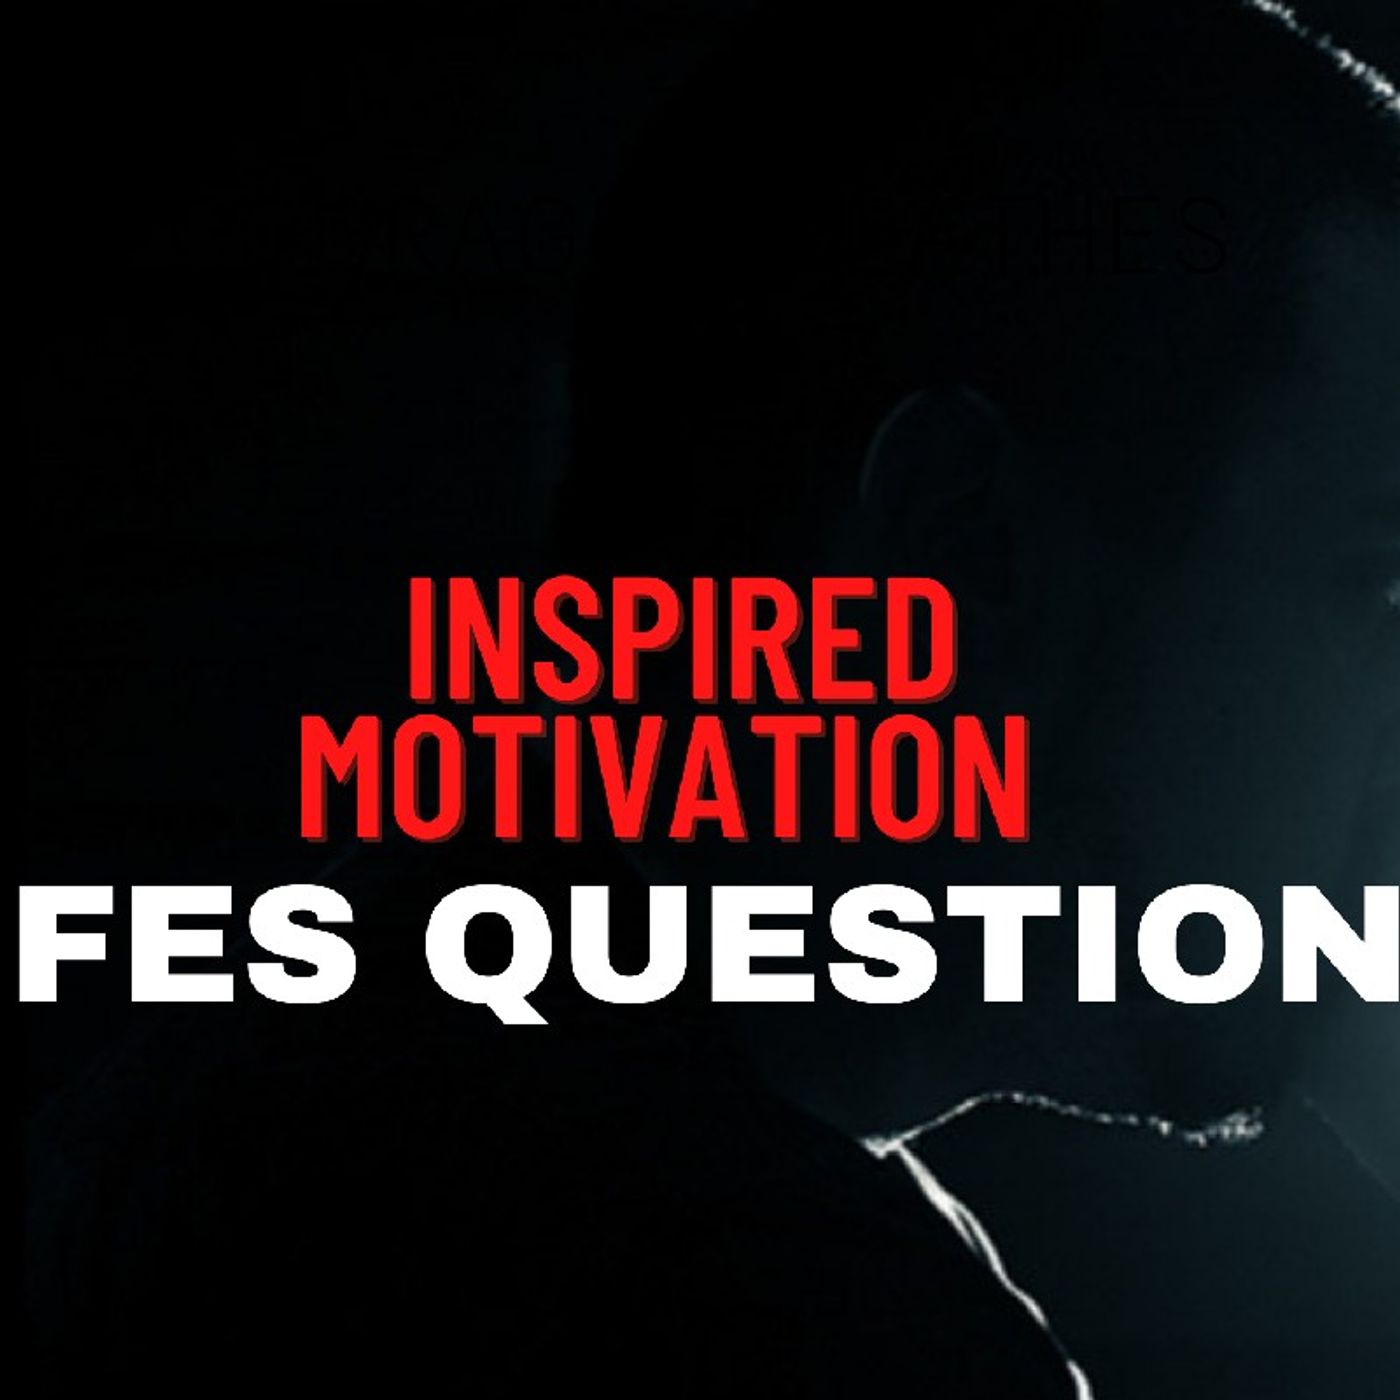 OVERCOMING THE VICTIM MINDSET|| LIFES QUESTIONS|| MOVING INSPIRATIONAL STORY